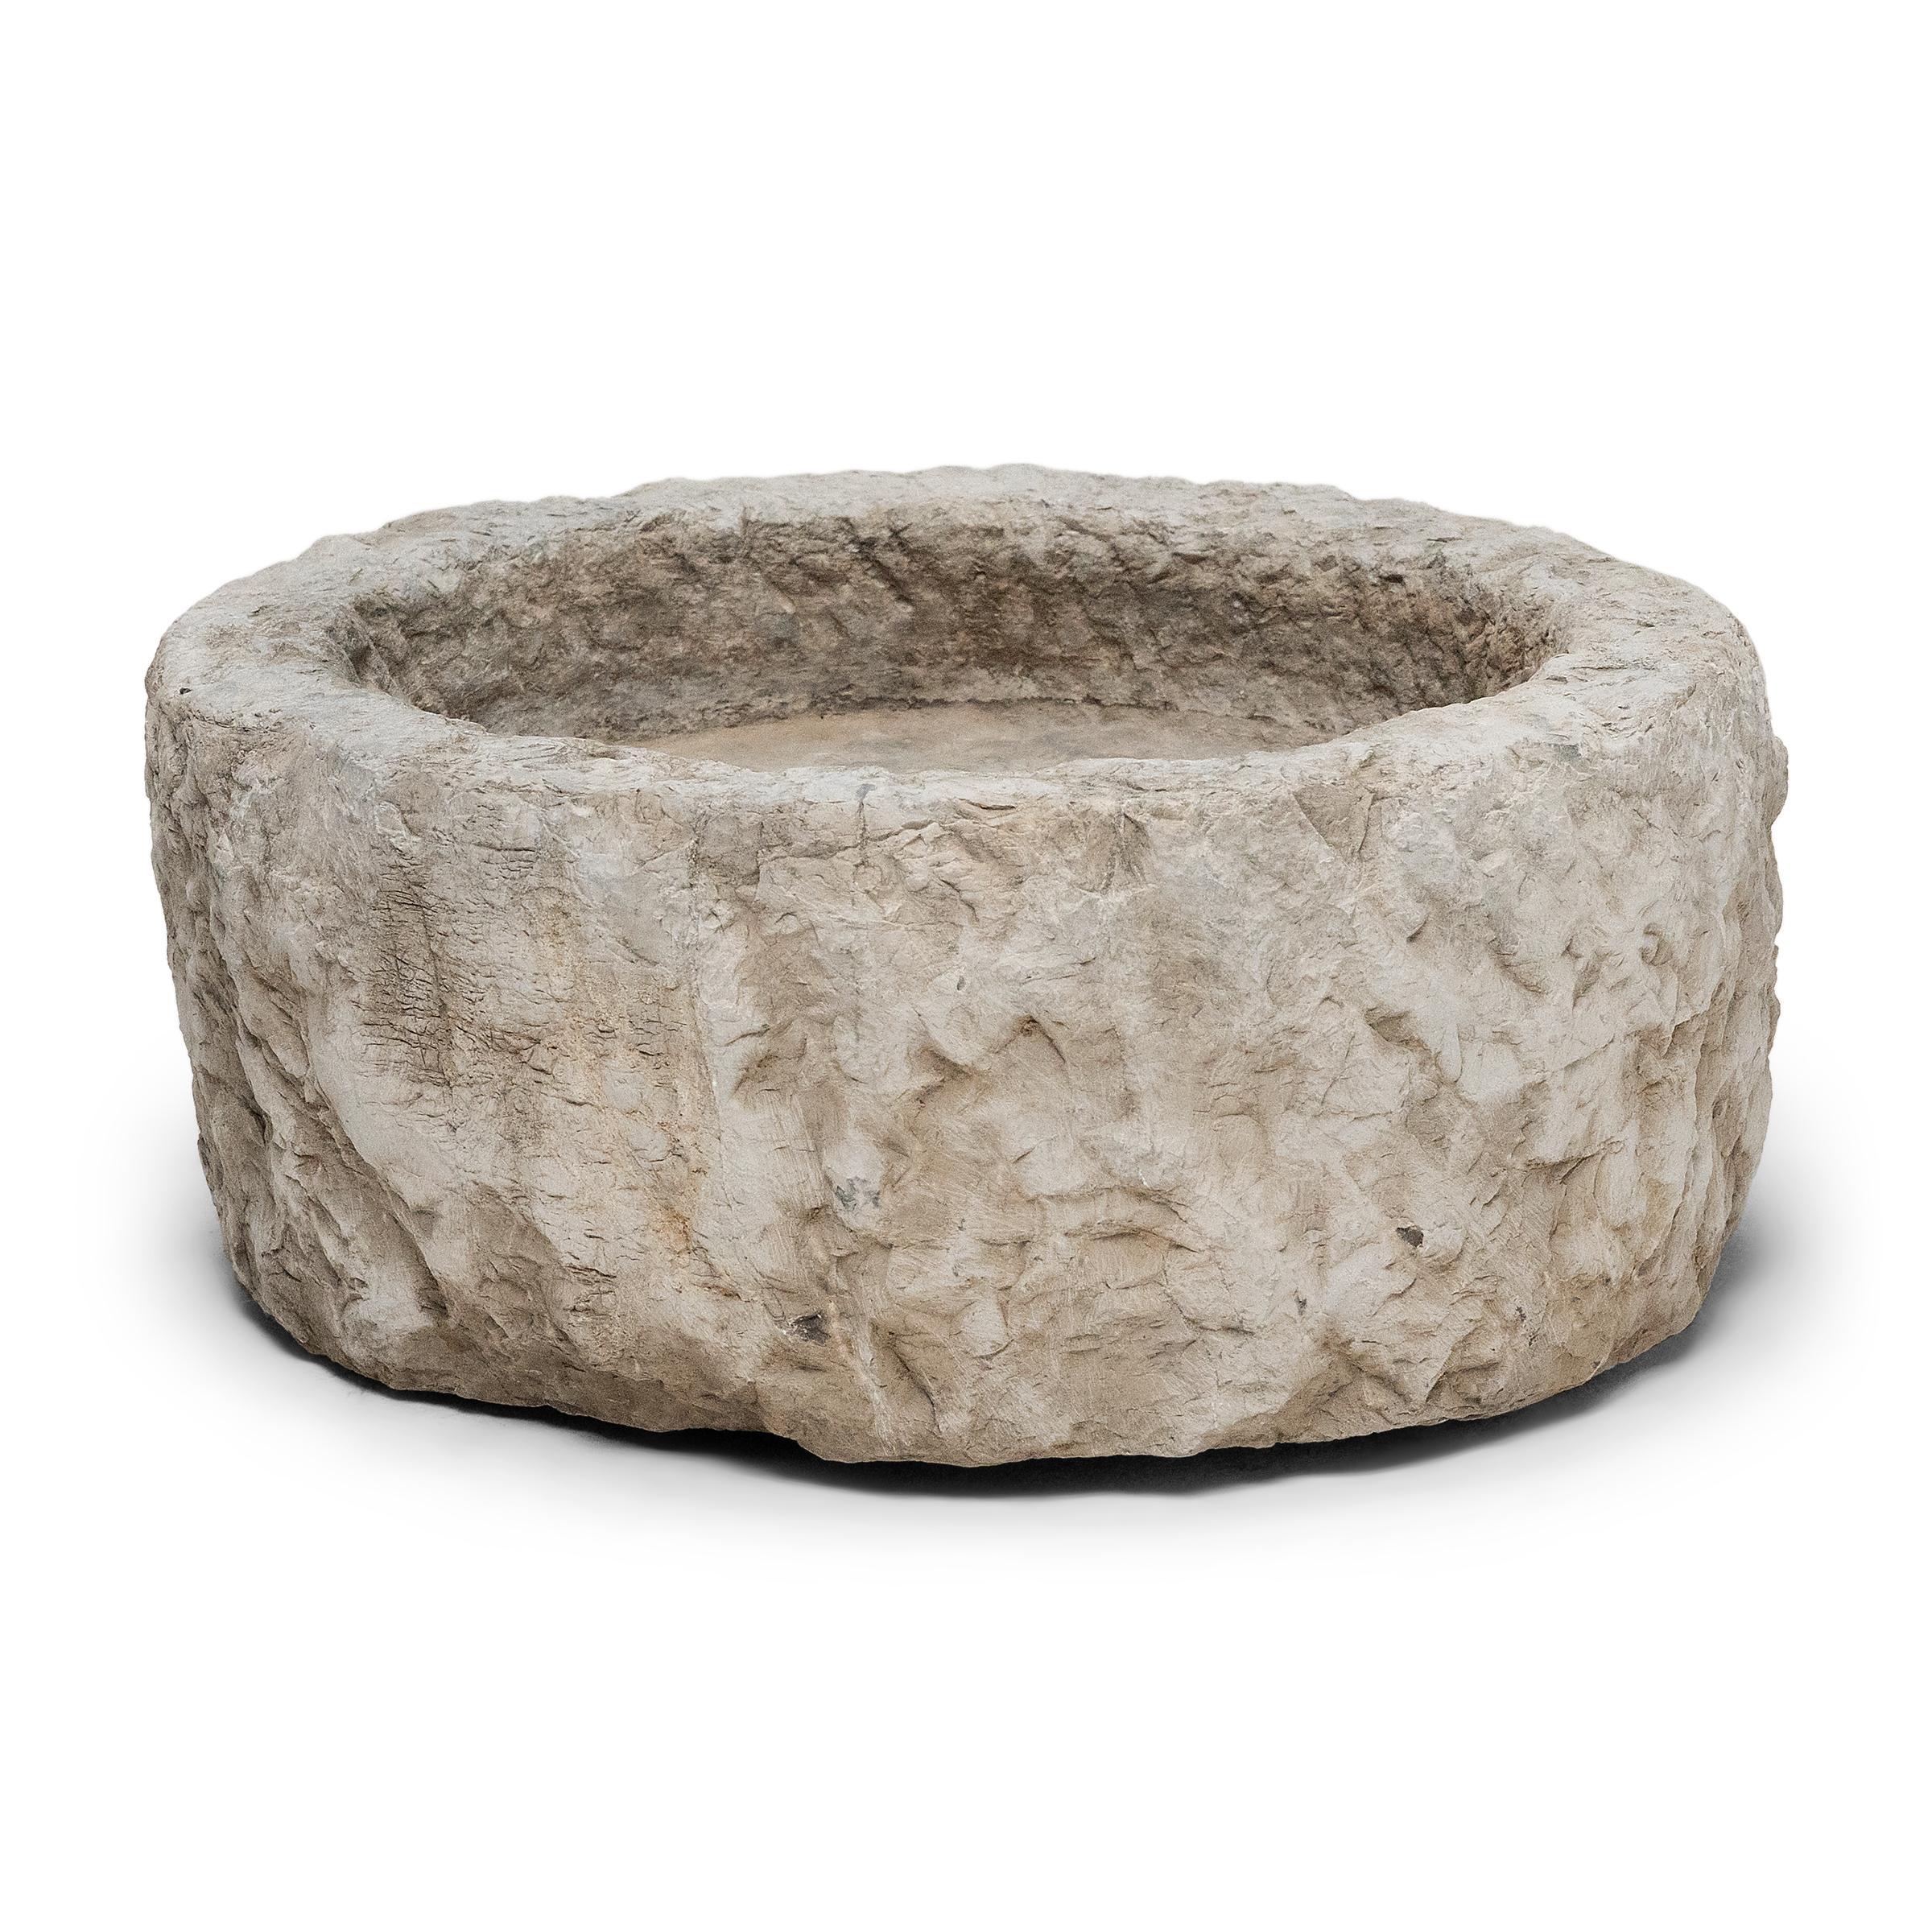 Once used on a provincial Chinese farm to hold water or animal feed, this early 19th-century stone trough is celebrated today for its organic form and rustic authenticity. Hand-carved from solid limestone, the trough has a circular form with slight